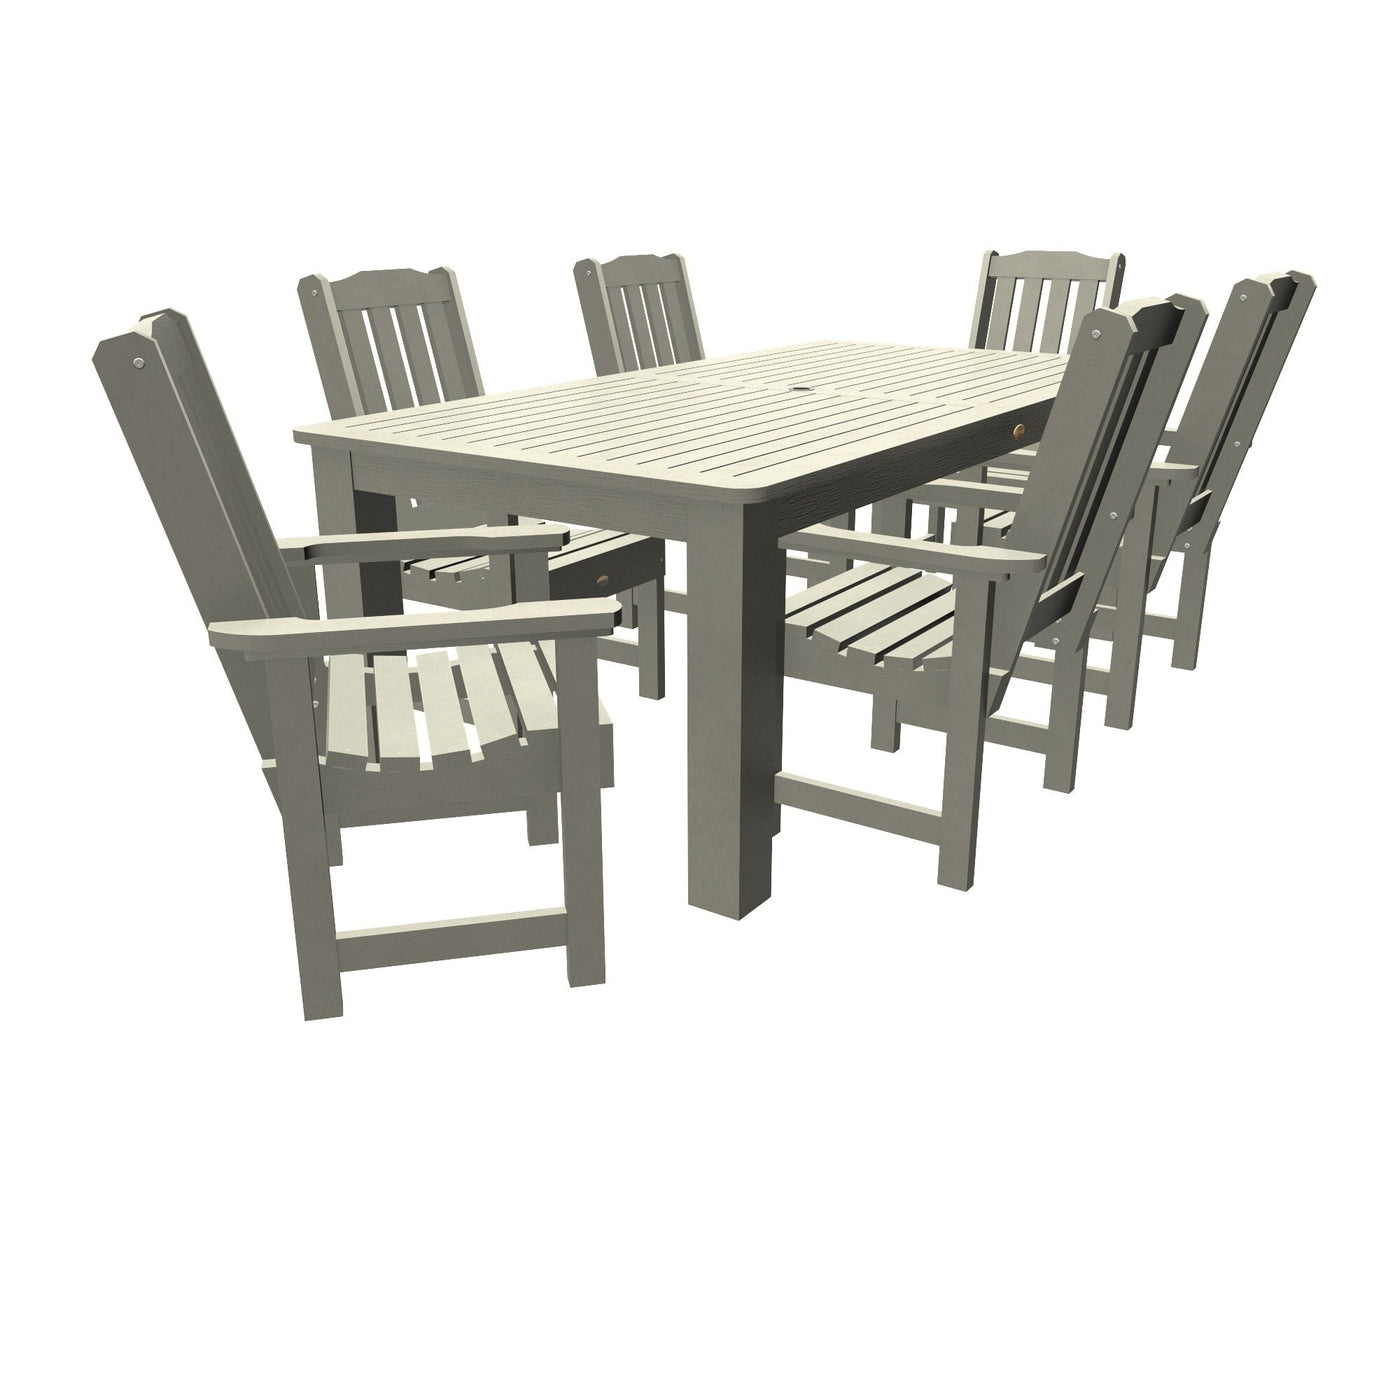 Lehigh 7pc Rectangular Outdoor Dining Set 42in x 84in - Dining Height Dining Highwood USA Harbor Gray 